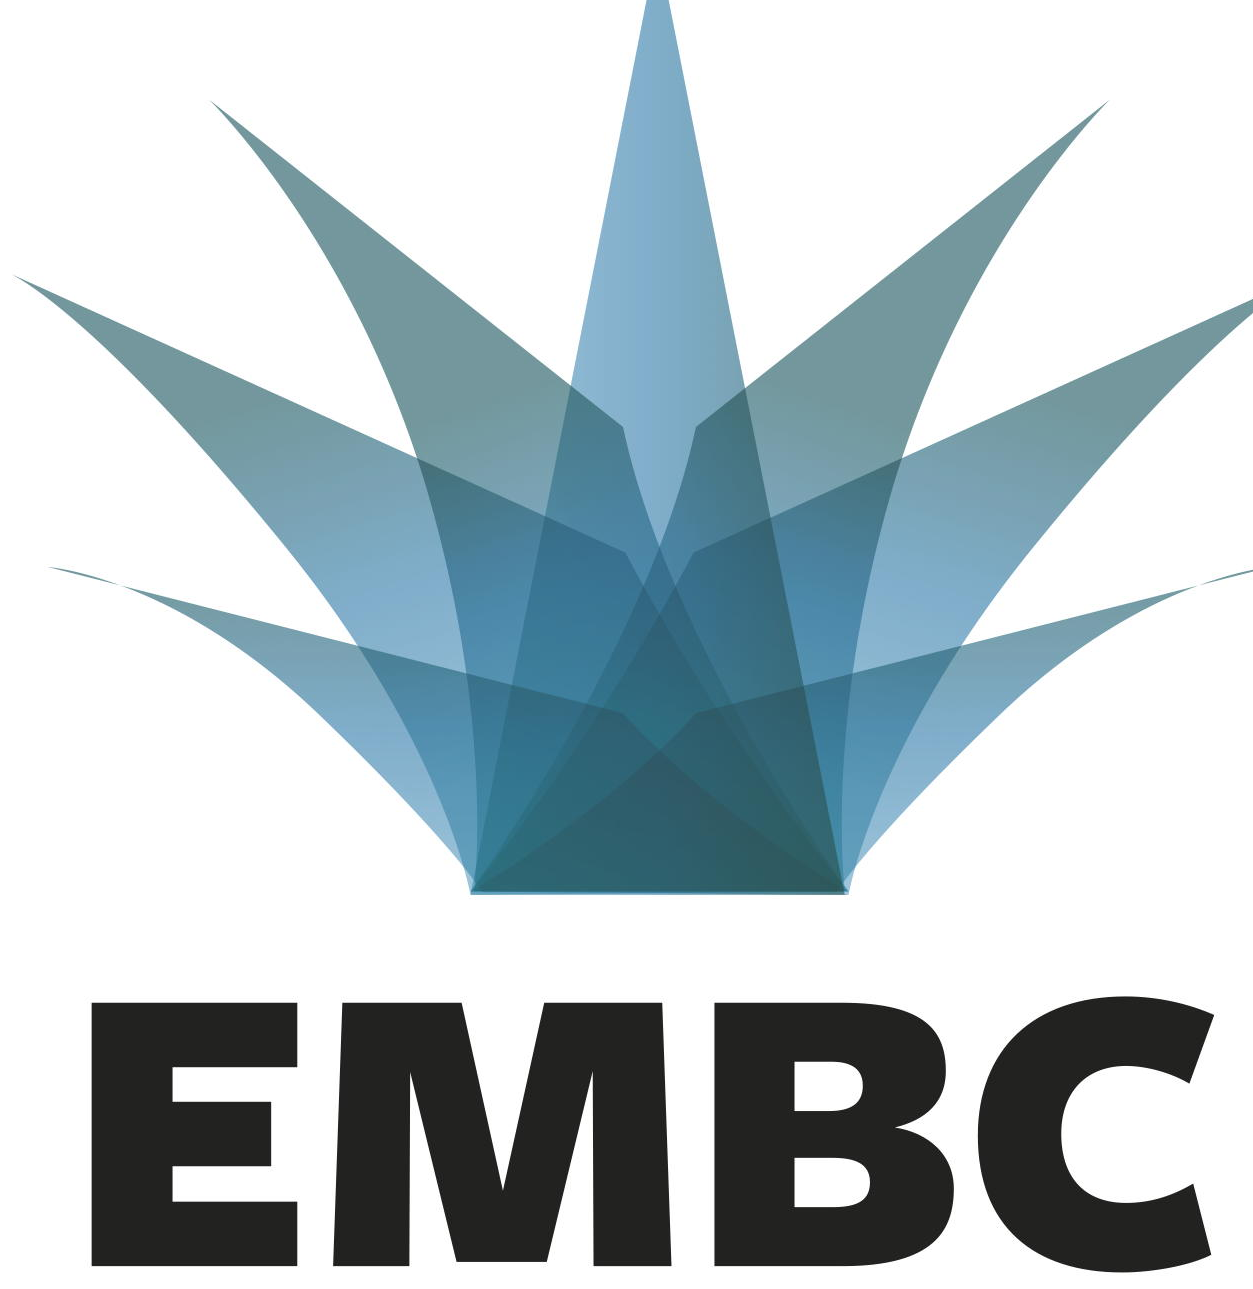 Five papers were accepted at the Engineering in Medicine and Biology Conference (EMBC) 2021